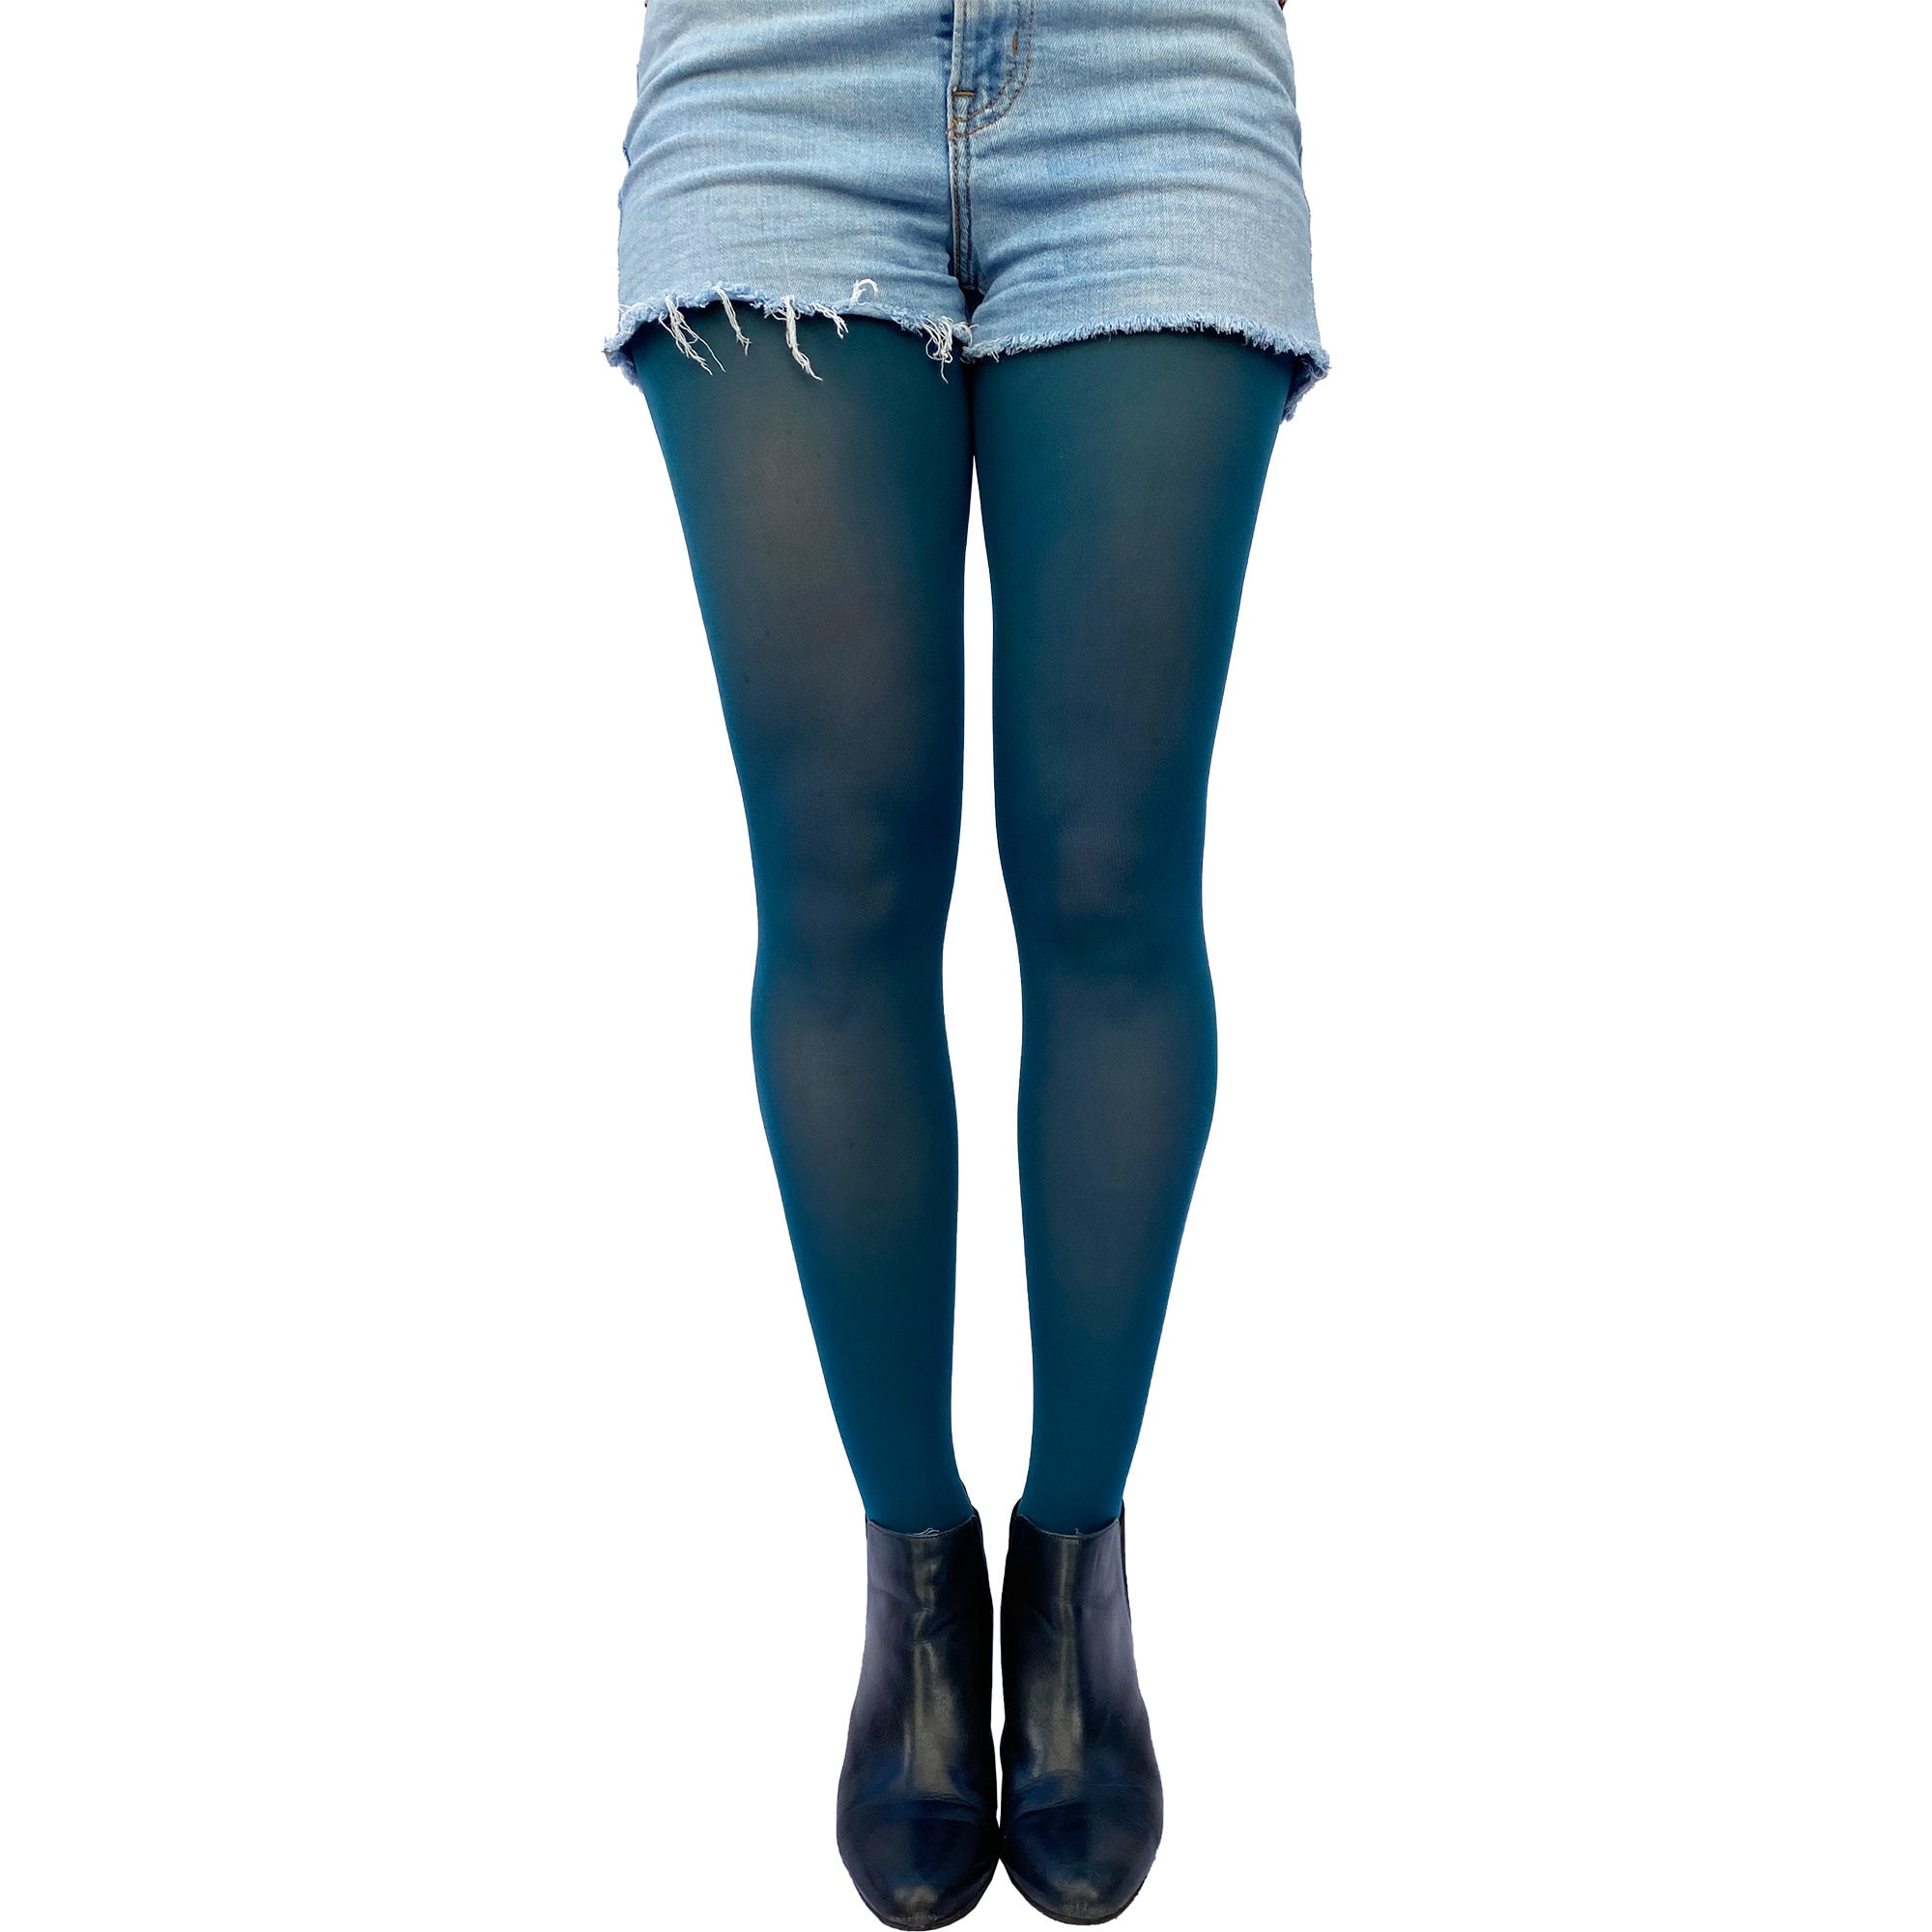 Teal Tights for Women Soft and Durable Opaque Pantyhose Tights